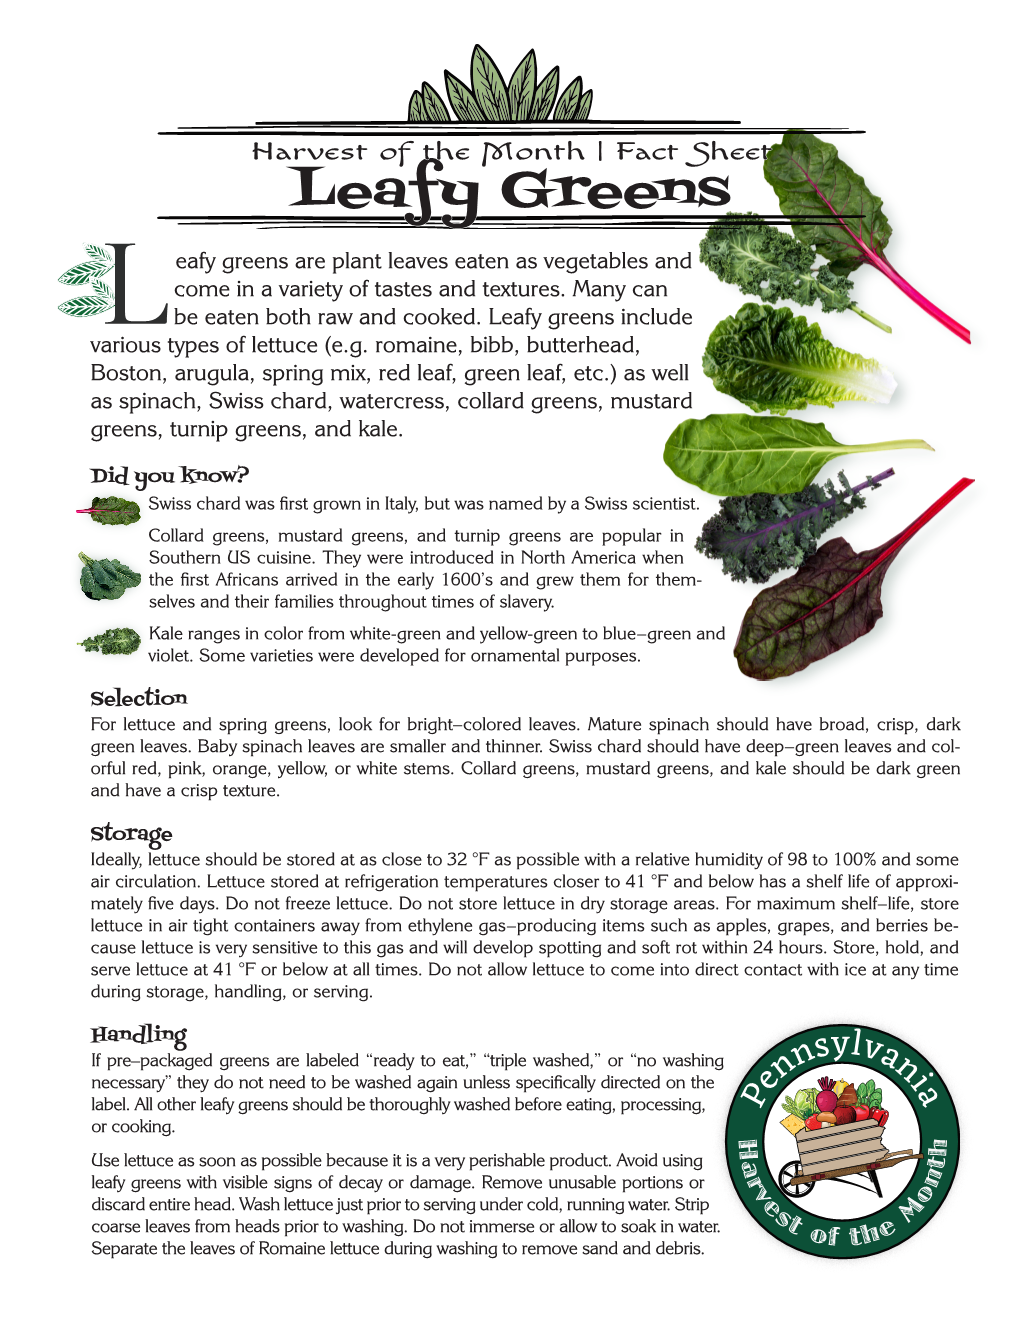 Leafy Greens Eafy Greens Are Plant Leaves Eaten As Vegetables and Come in a Variety of Tastes and Textures